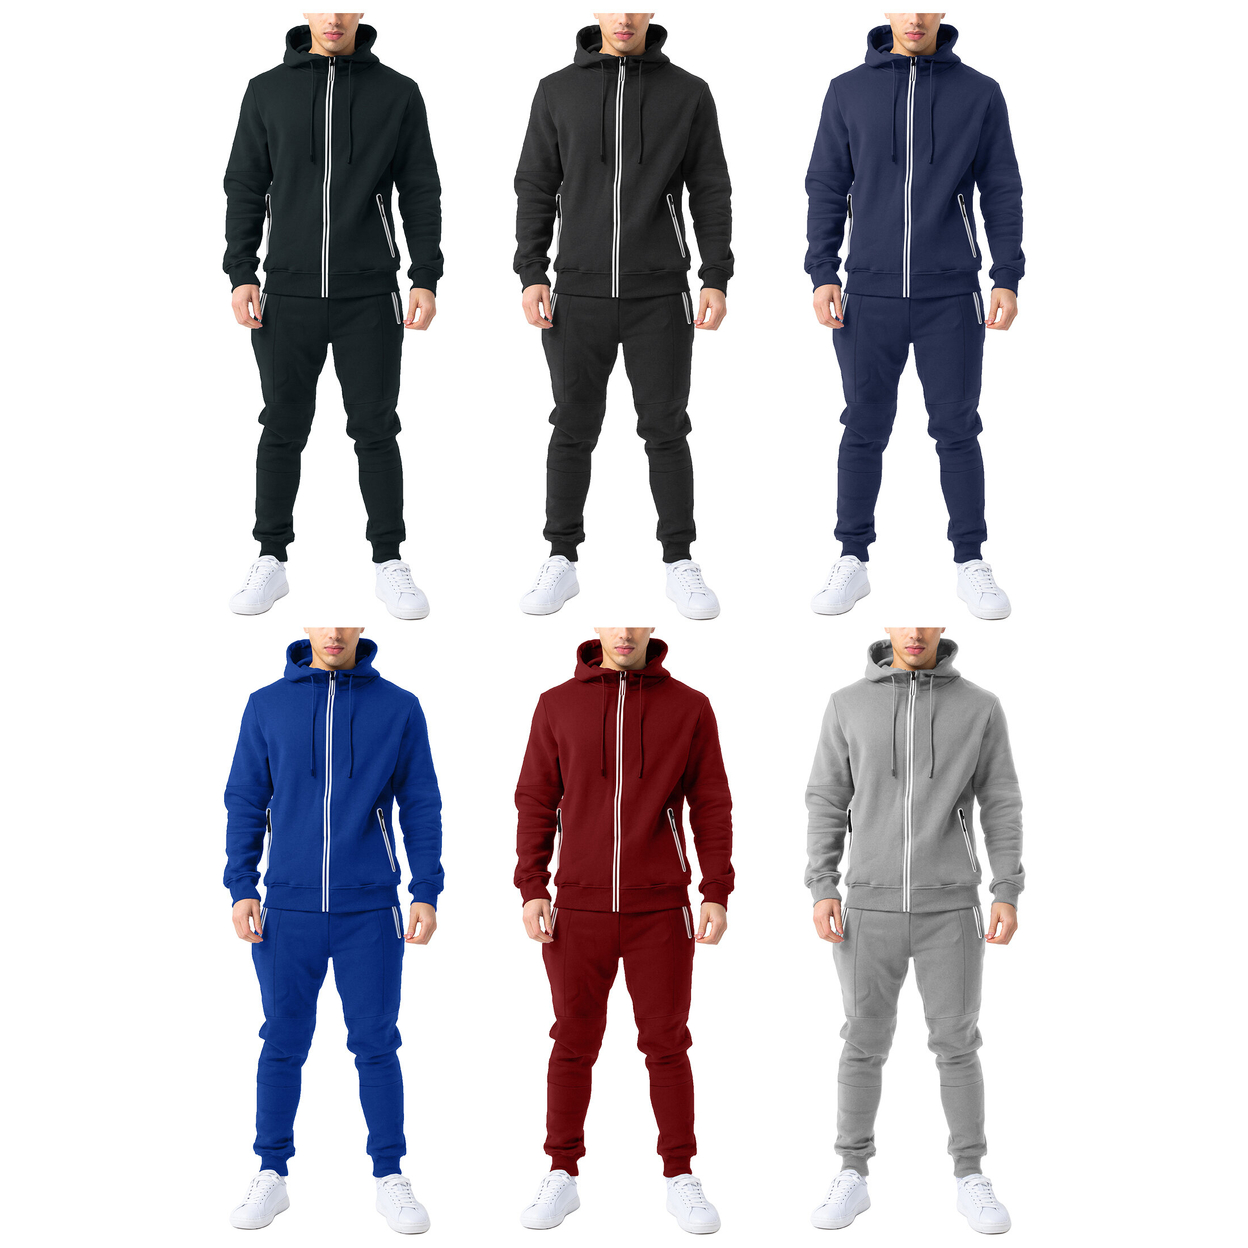 2-Pack: Men's Cozy Slim Fit Active Athletic Full Zip Hoodie And Jogger Tracksuit - Blue & Blue, Medium